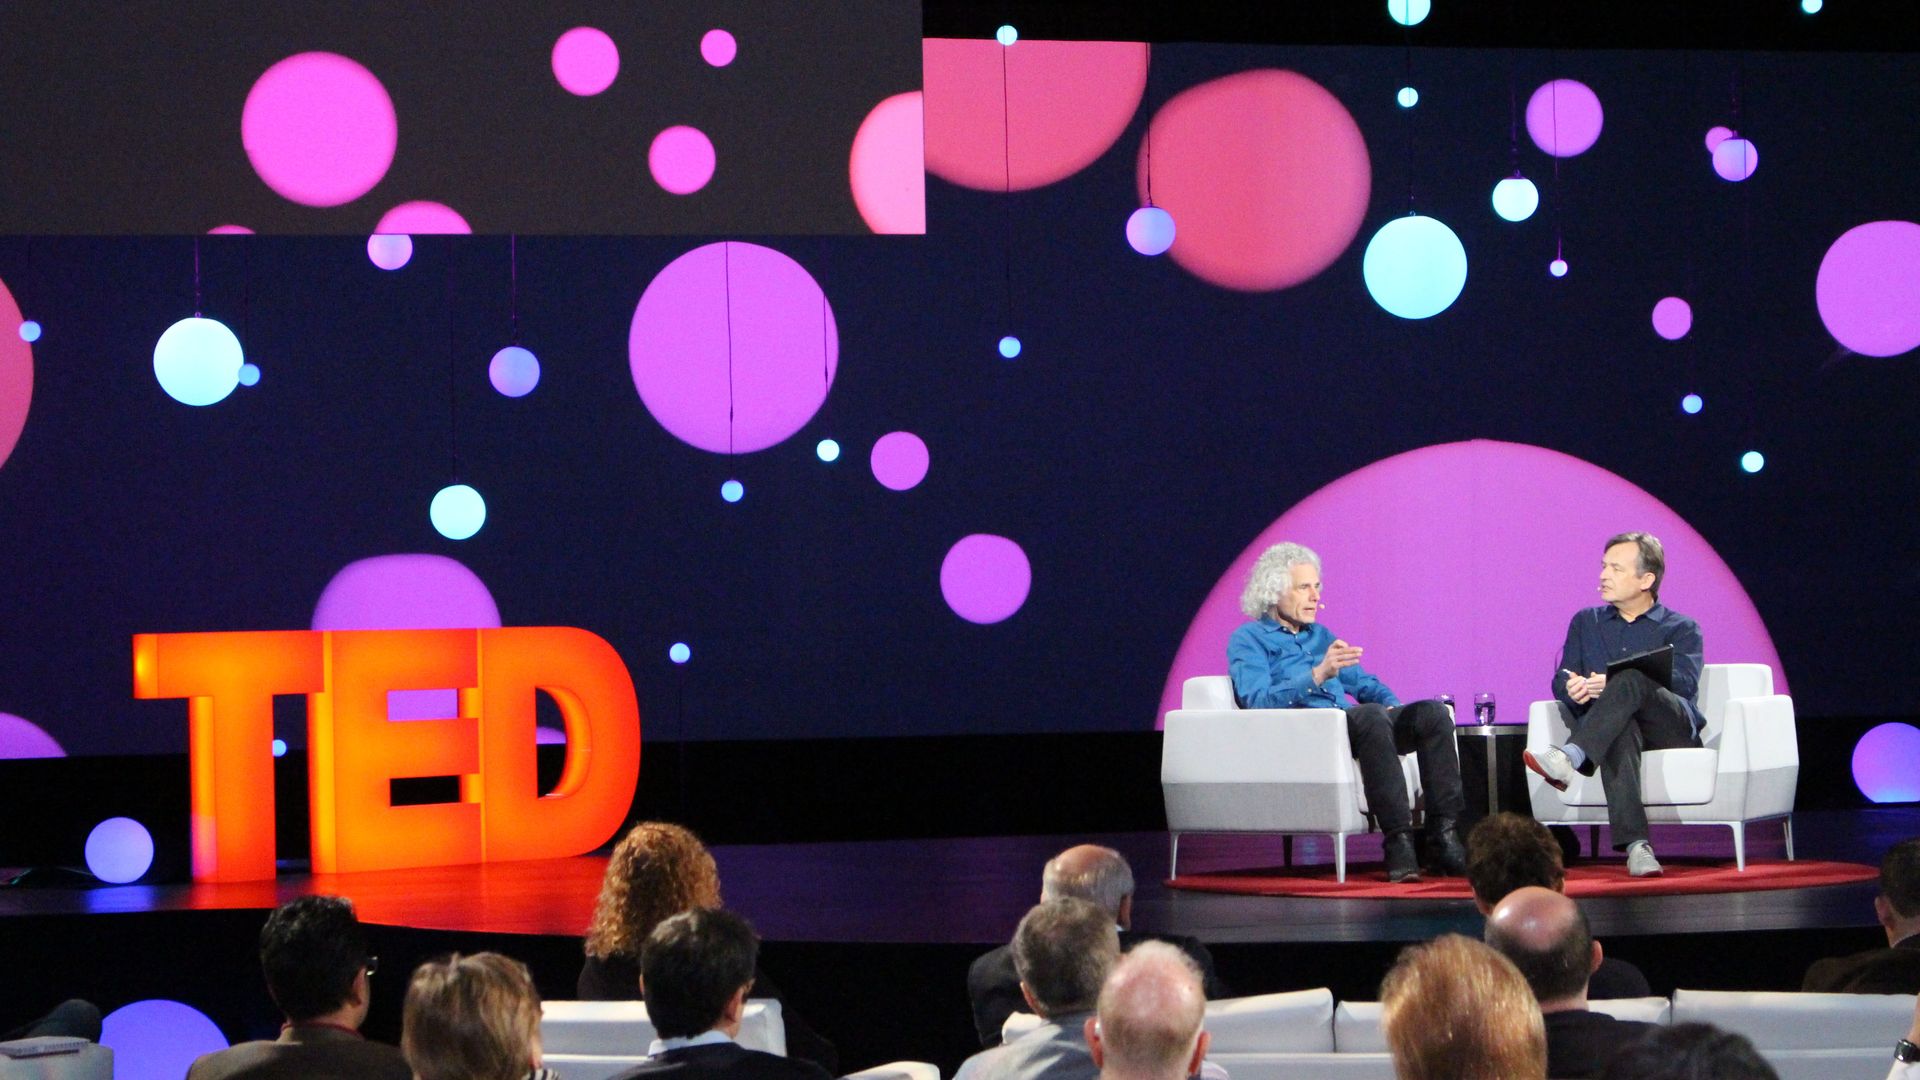 TED conference curator Chris Anderson interviews author Steven Pinker at TED 2018.